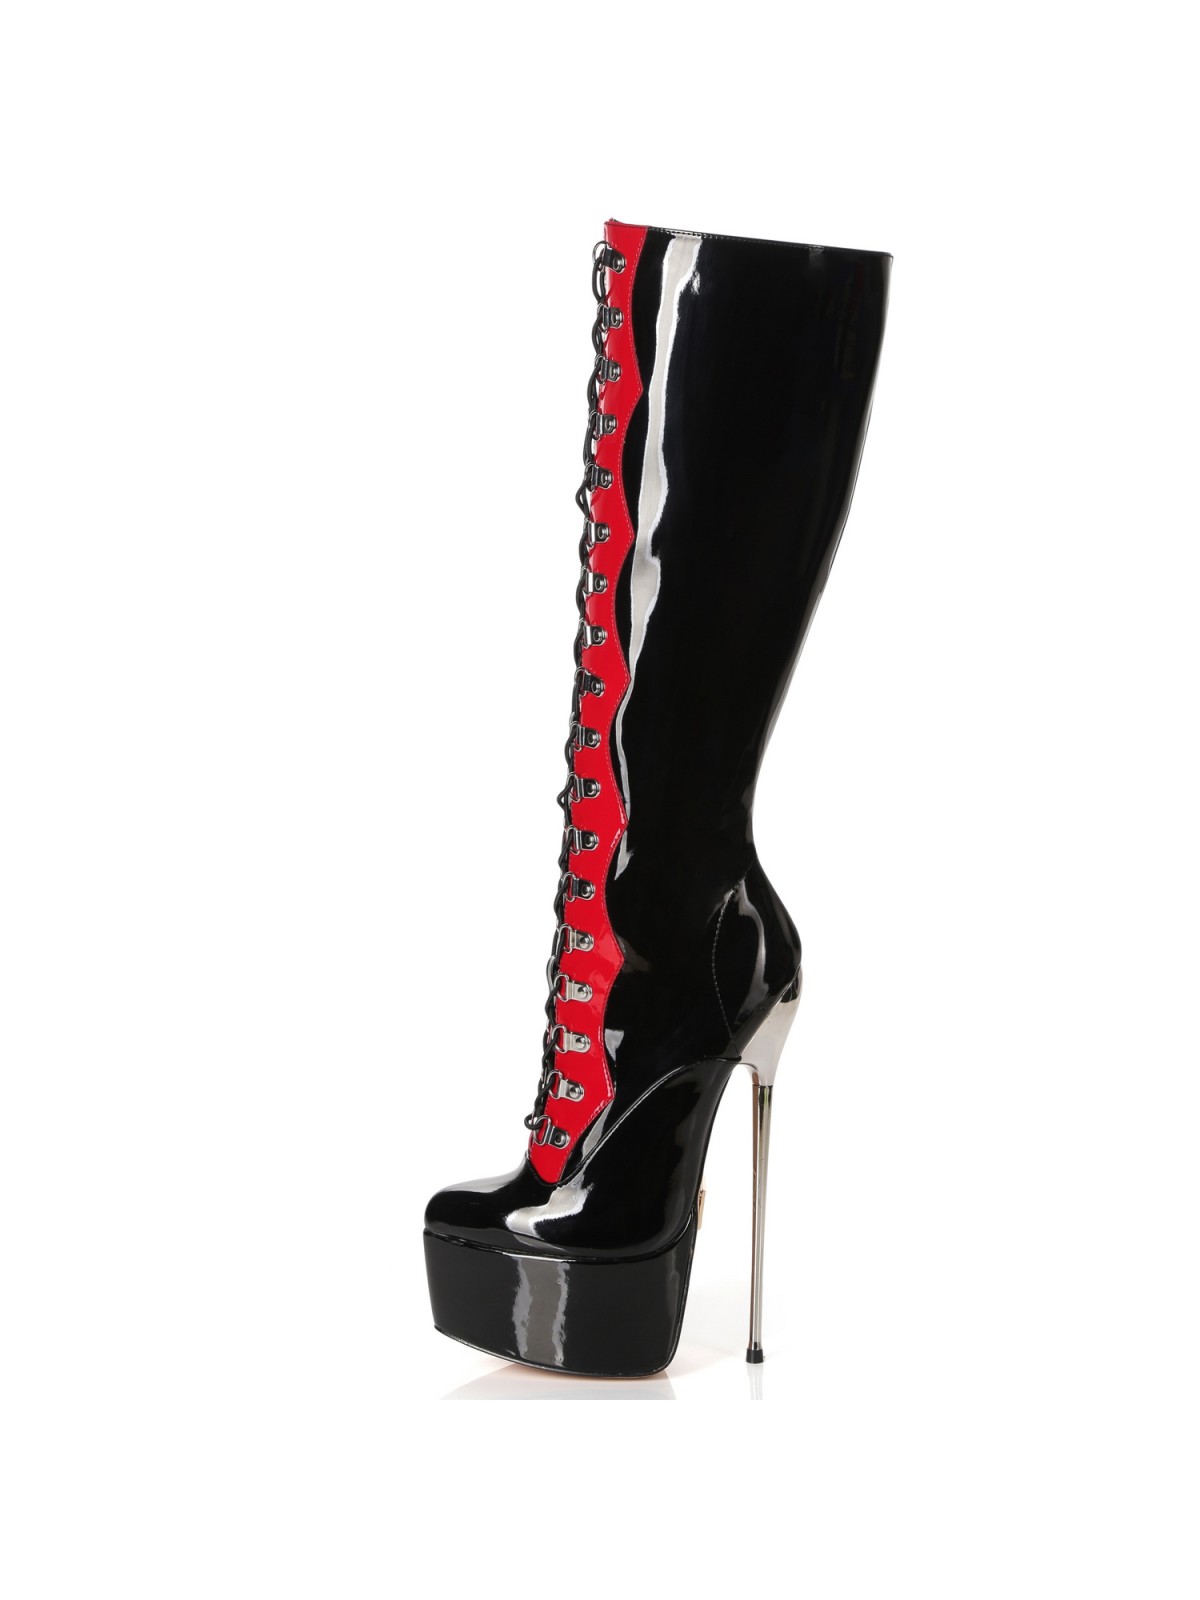 Extremely high heels platform boots